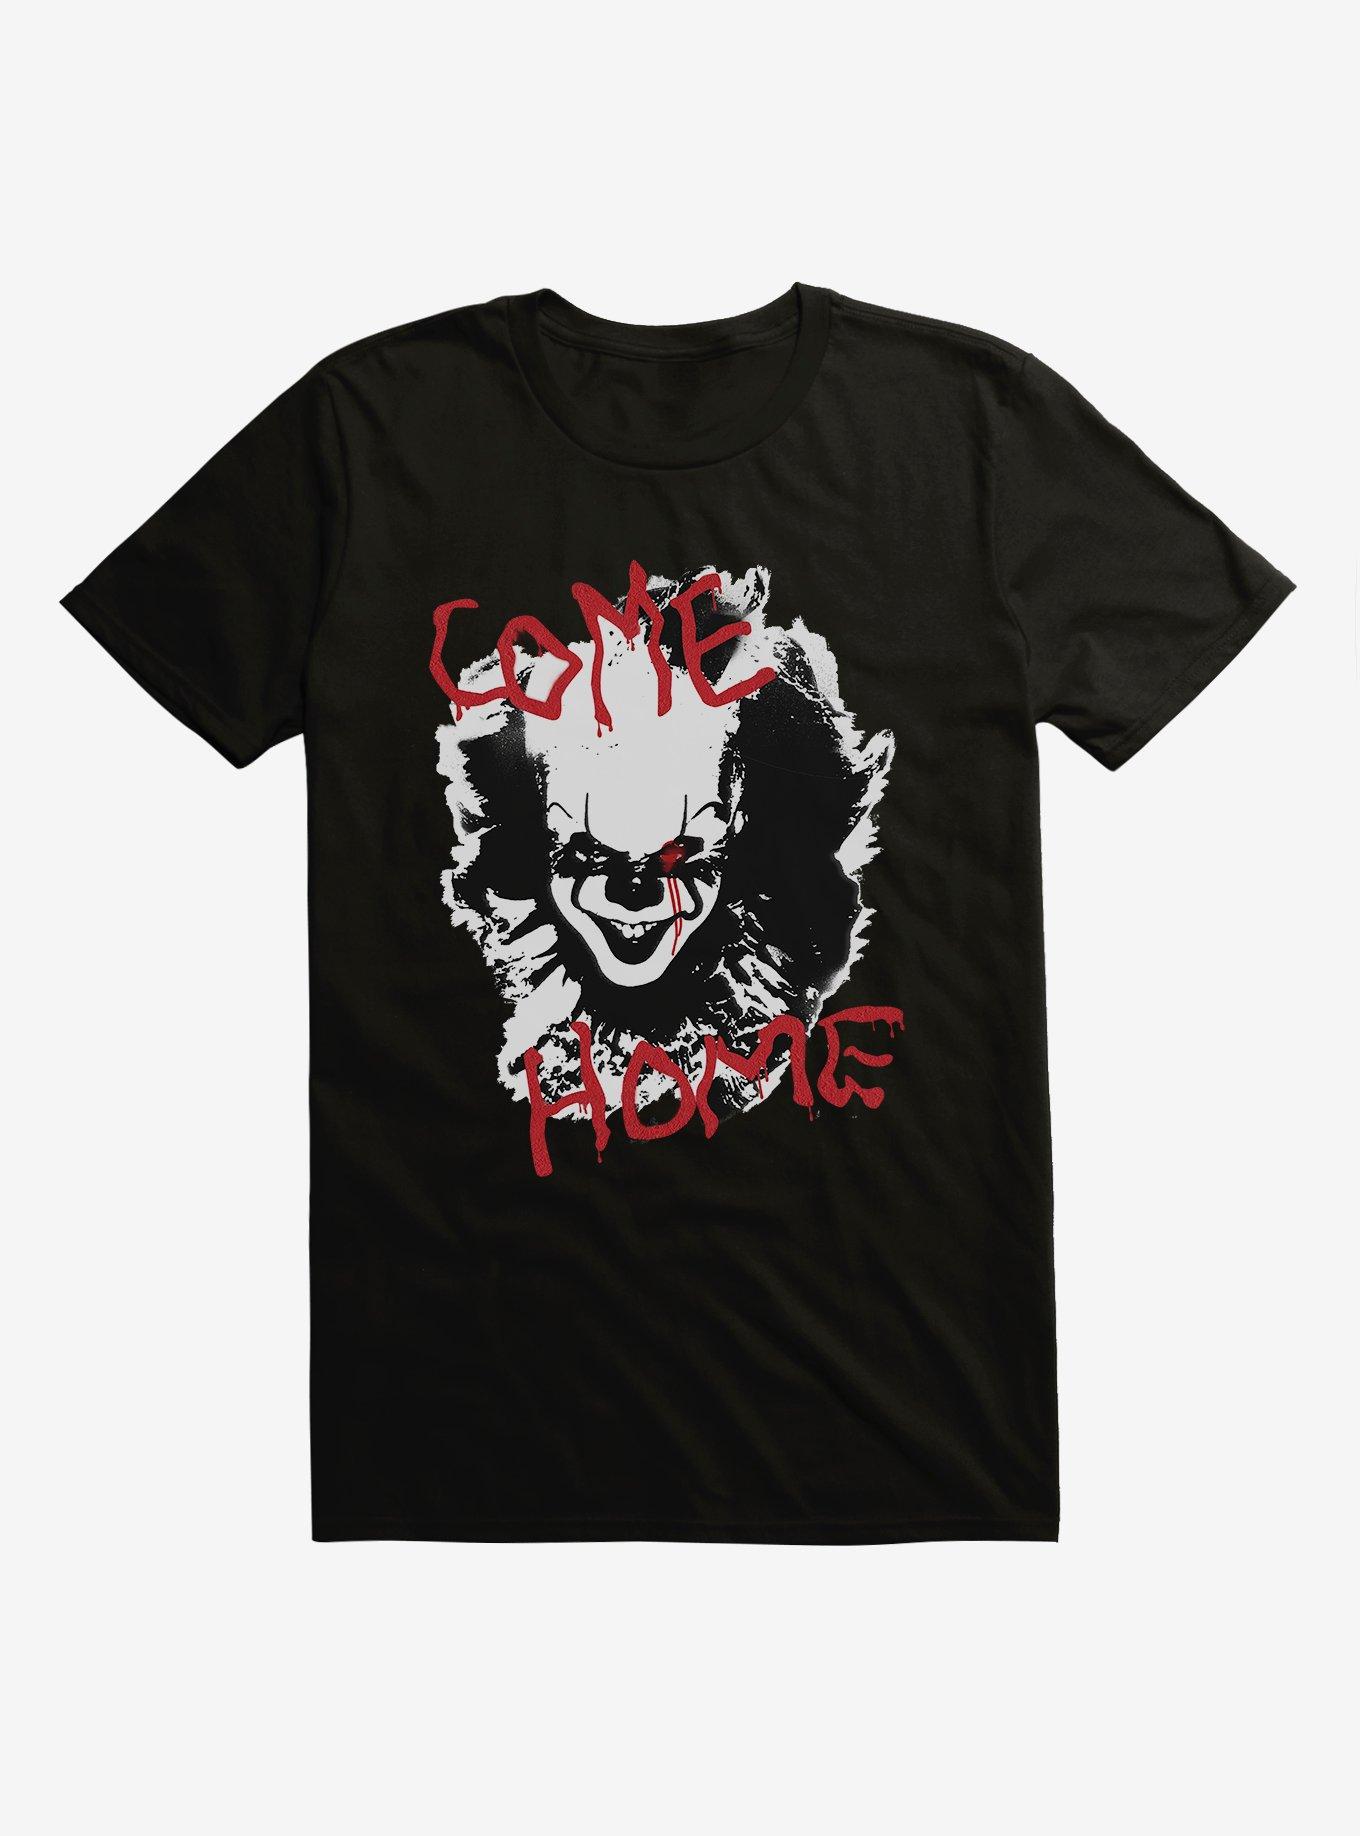 IT Chapter Two Come Home Cutout T-Shirt, BLACK, hi-res